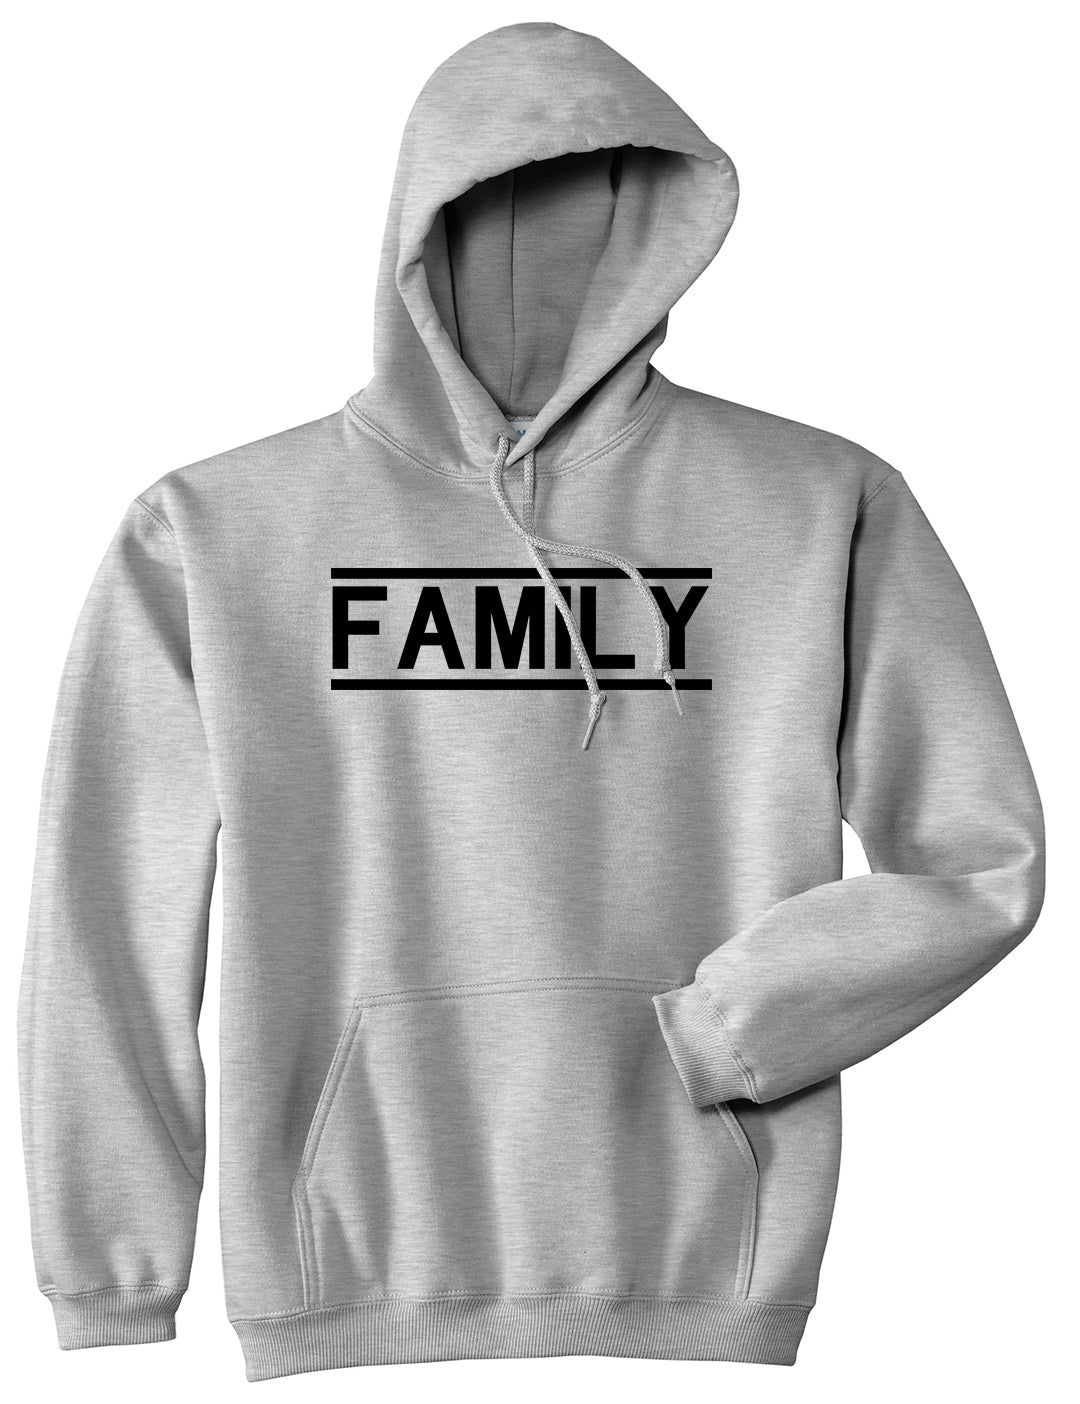 Family Fam Squad Mens Grey Pullover Hoodie by KINGS OF NY